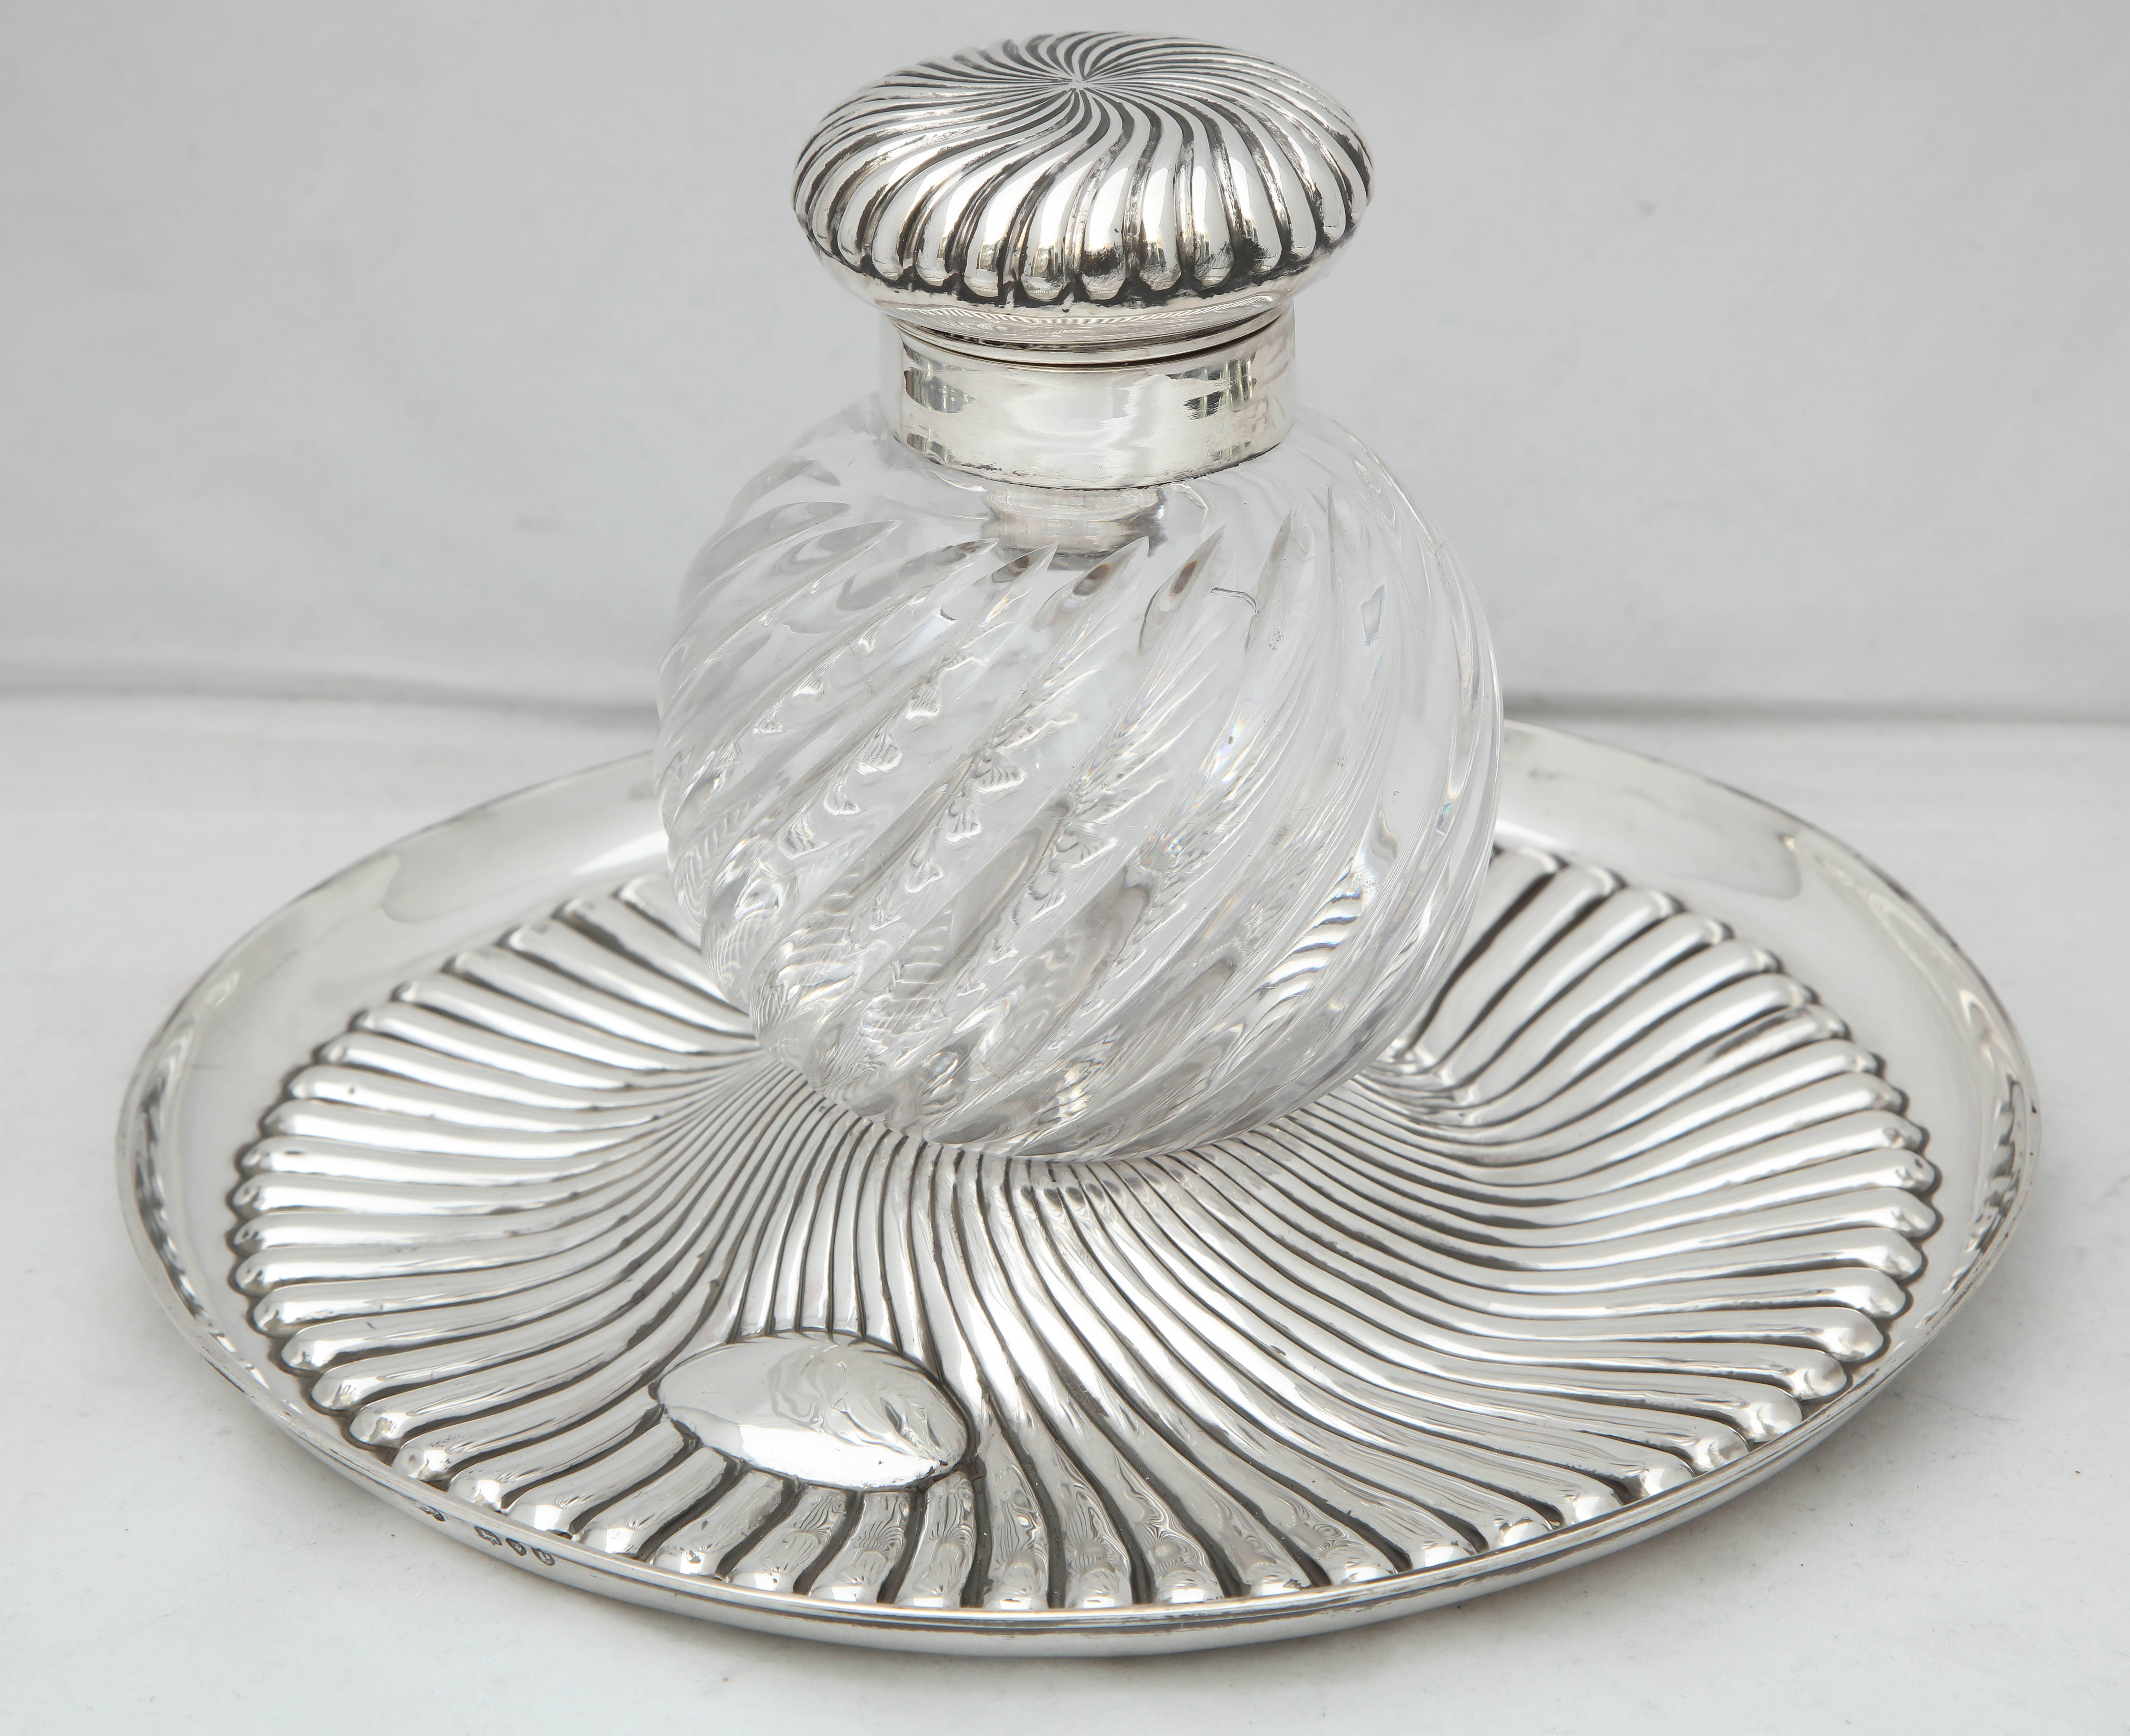 Rare, very large, unusual Victorian sterling silver-mounted spiral cut inkwell with hinged lid on stand, London, year-hallmarked for 1890, Charles Boynton & Sons - makers. Crystal fits into opening on all sterling silver round stand. The hinged lid